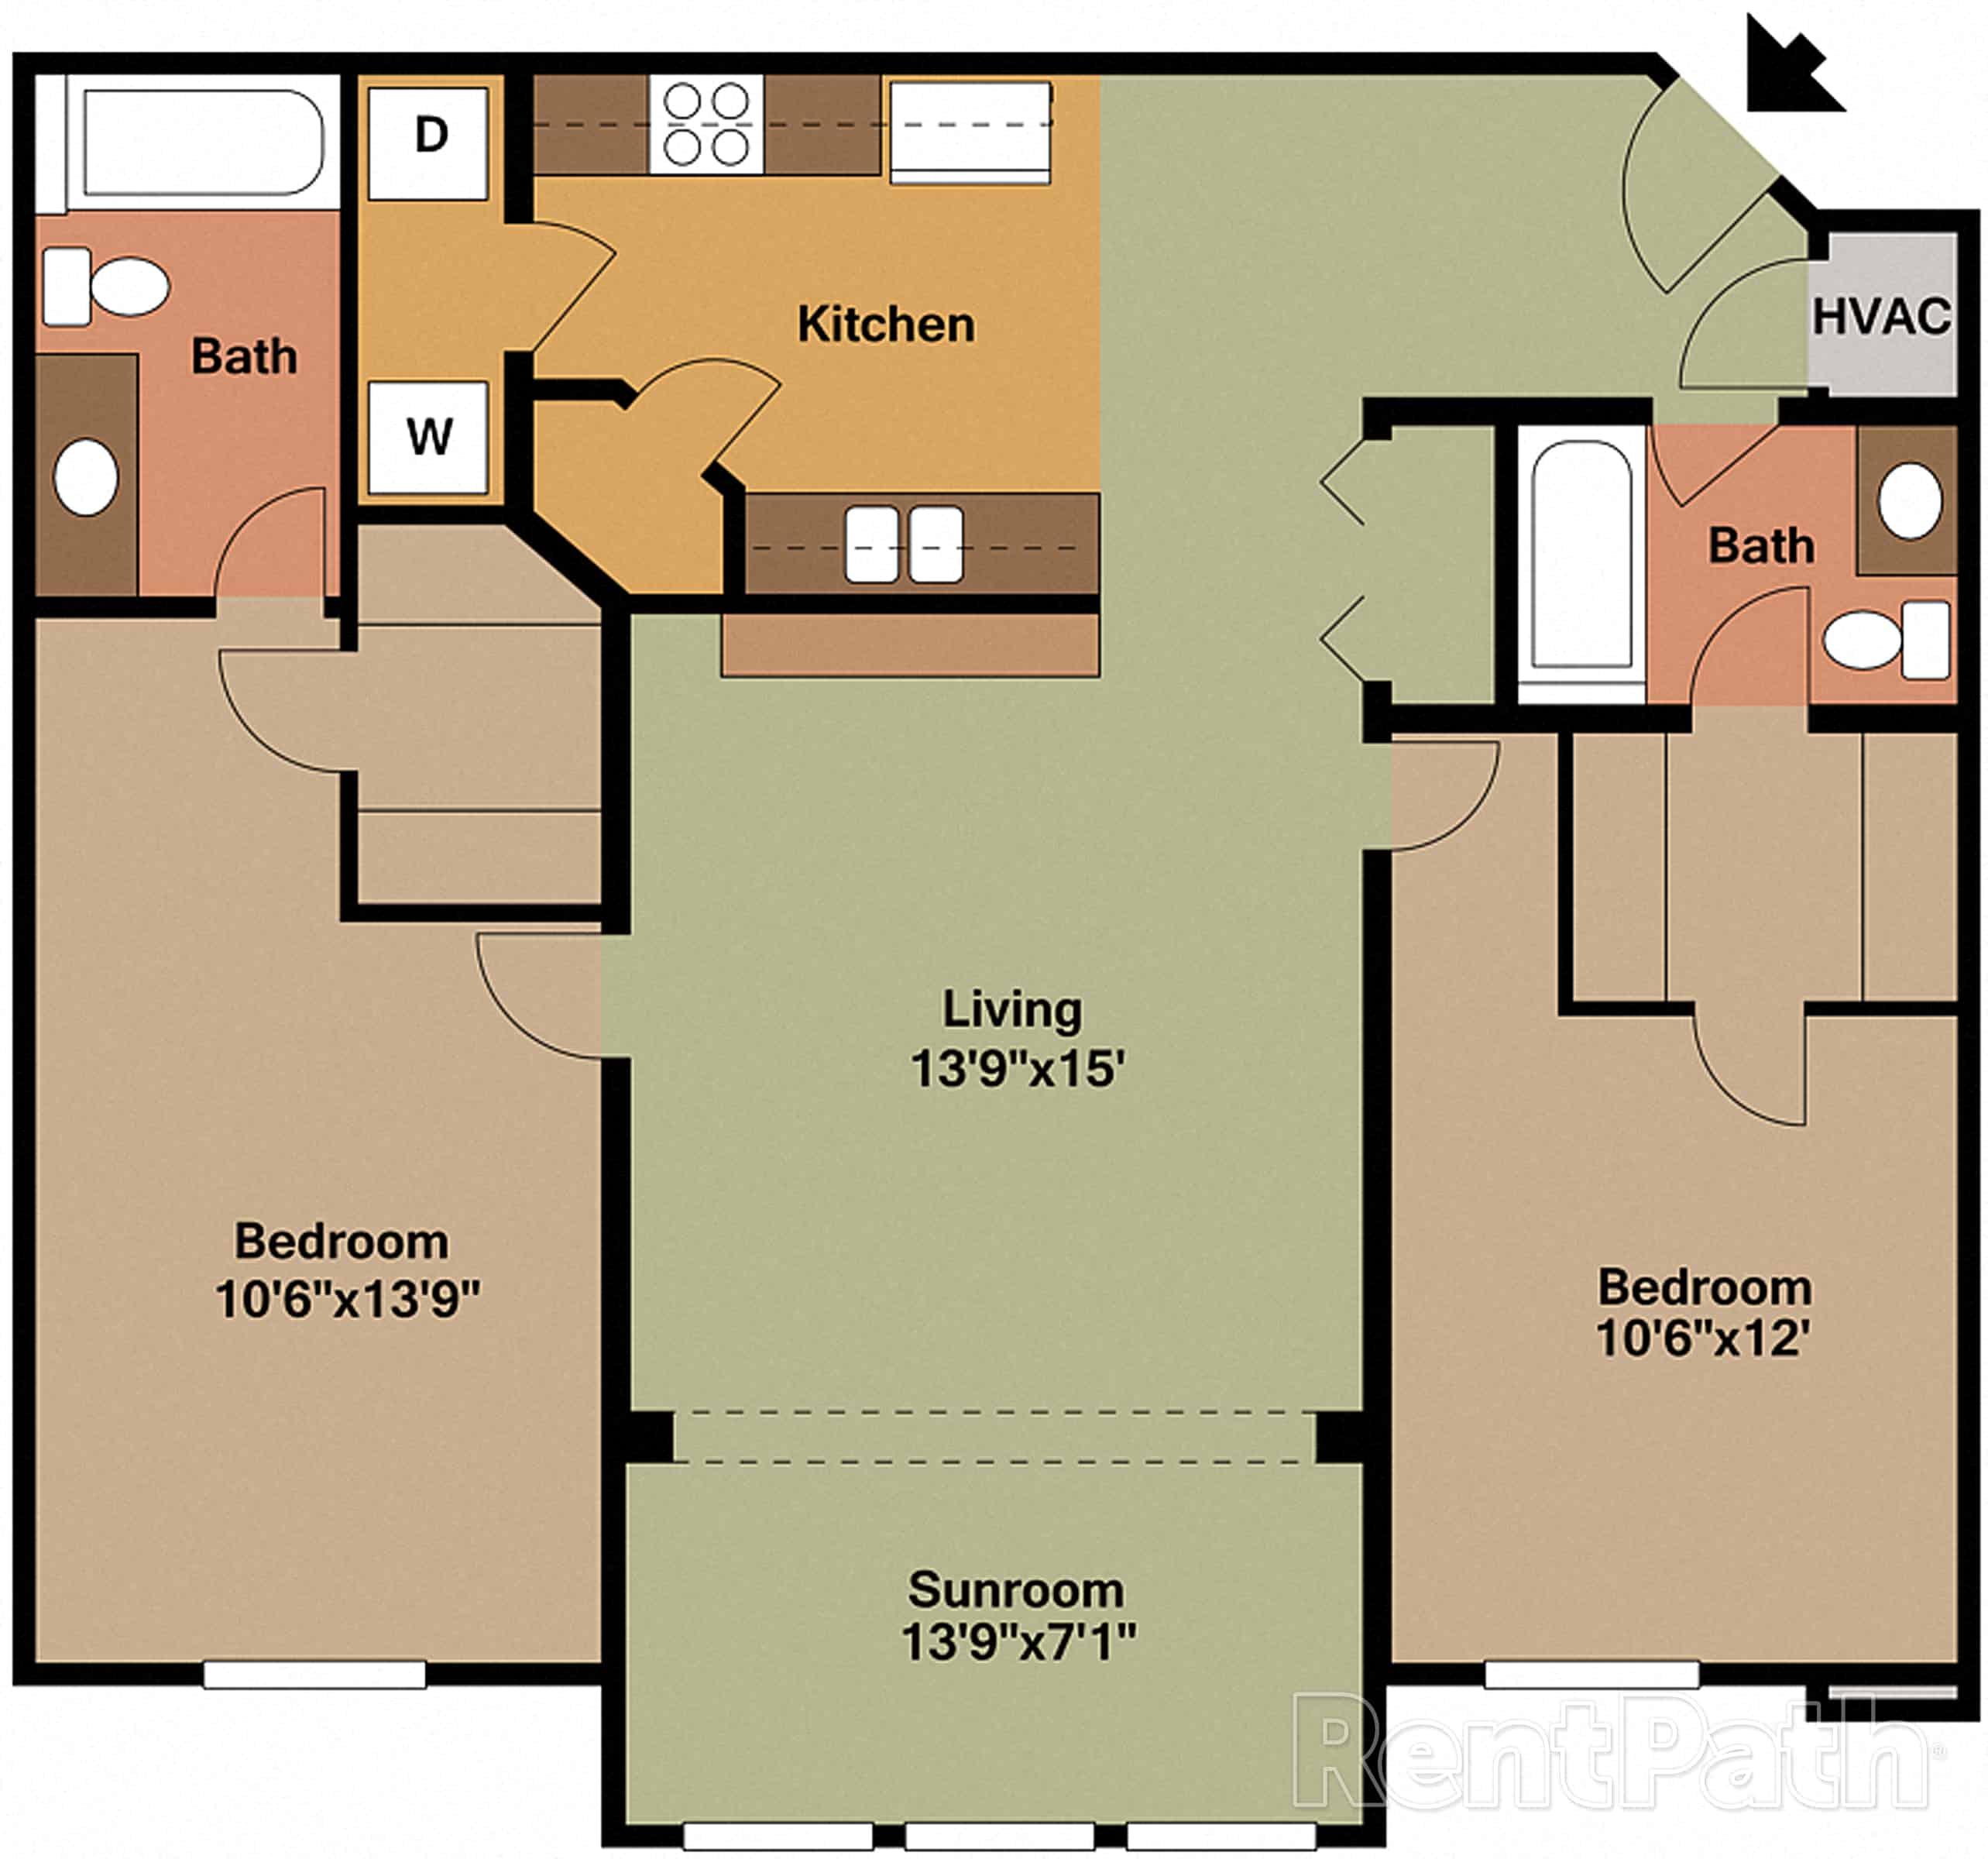 View Our 1 & 2 Bedroom Apartment Floor Plans | Homestead Apartments